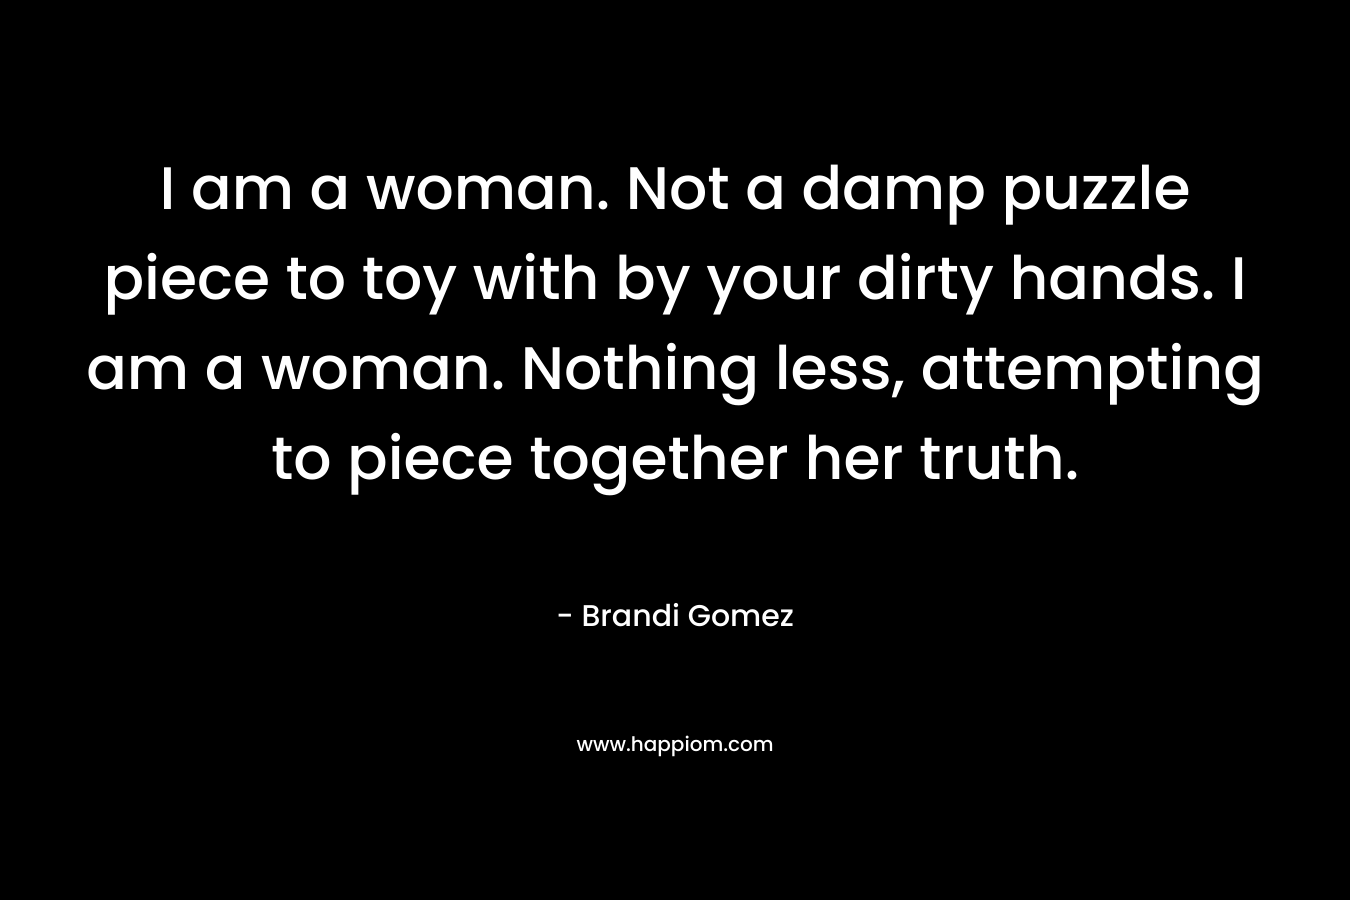 I am a woman. Not a damp puzzle piece to toy with by your dirty hands. I am a woman. Nothing less, attempting to piece together her truth. – Brandi Gomez